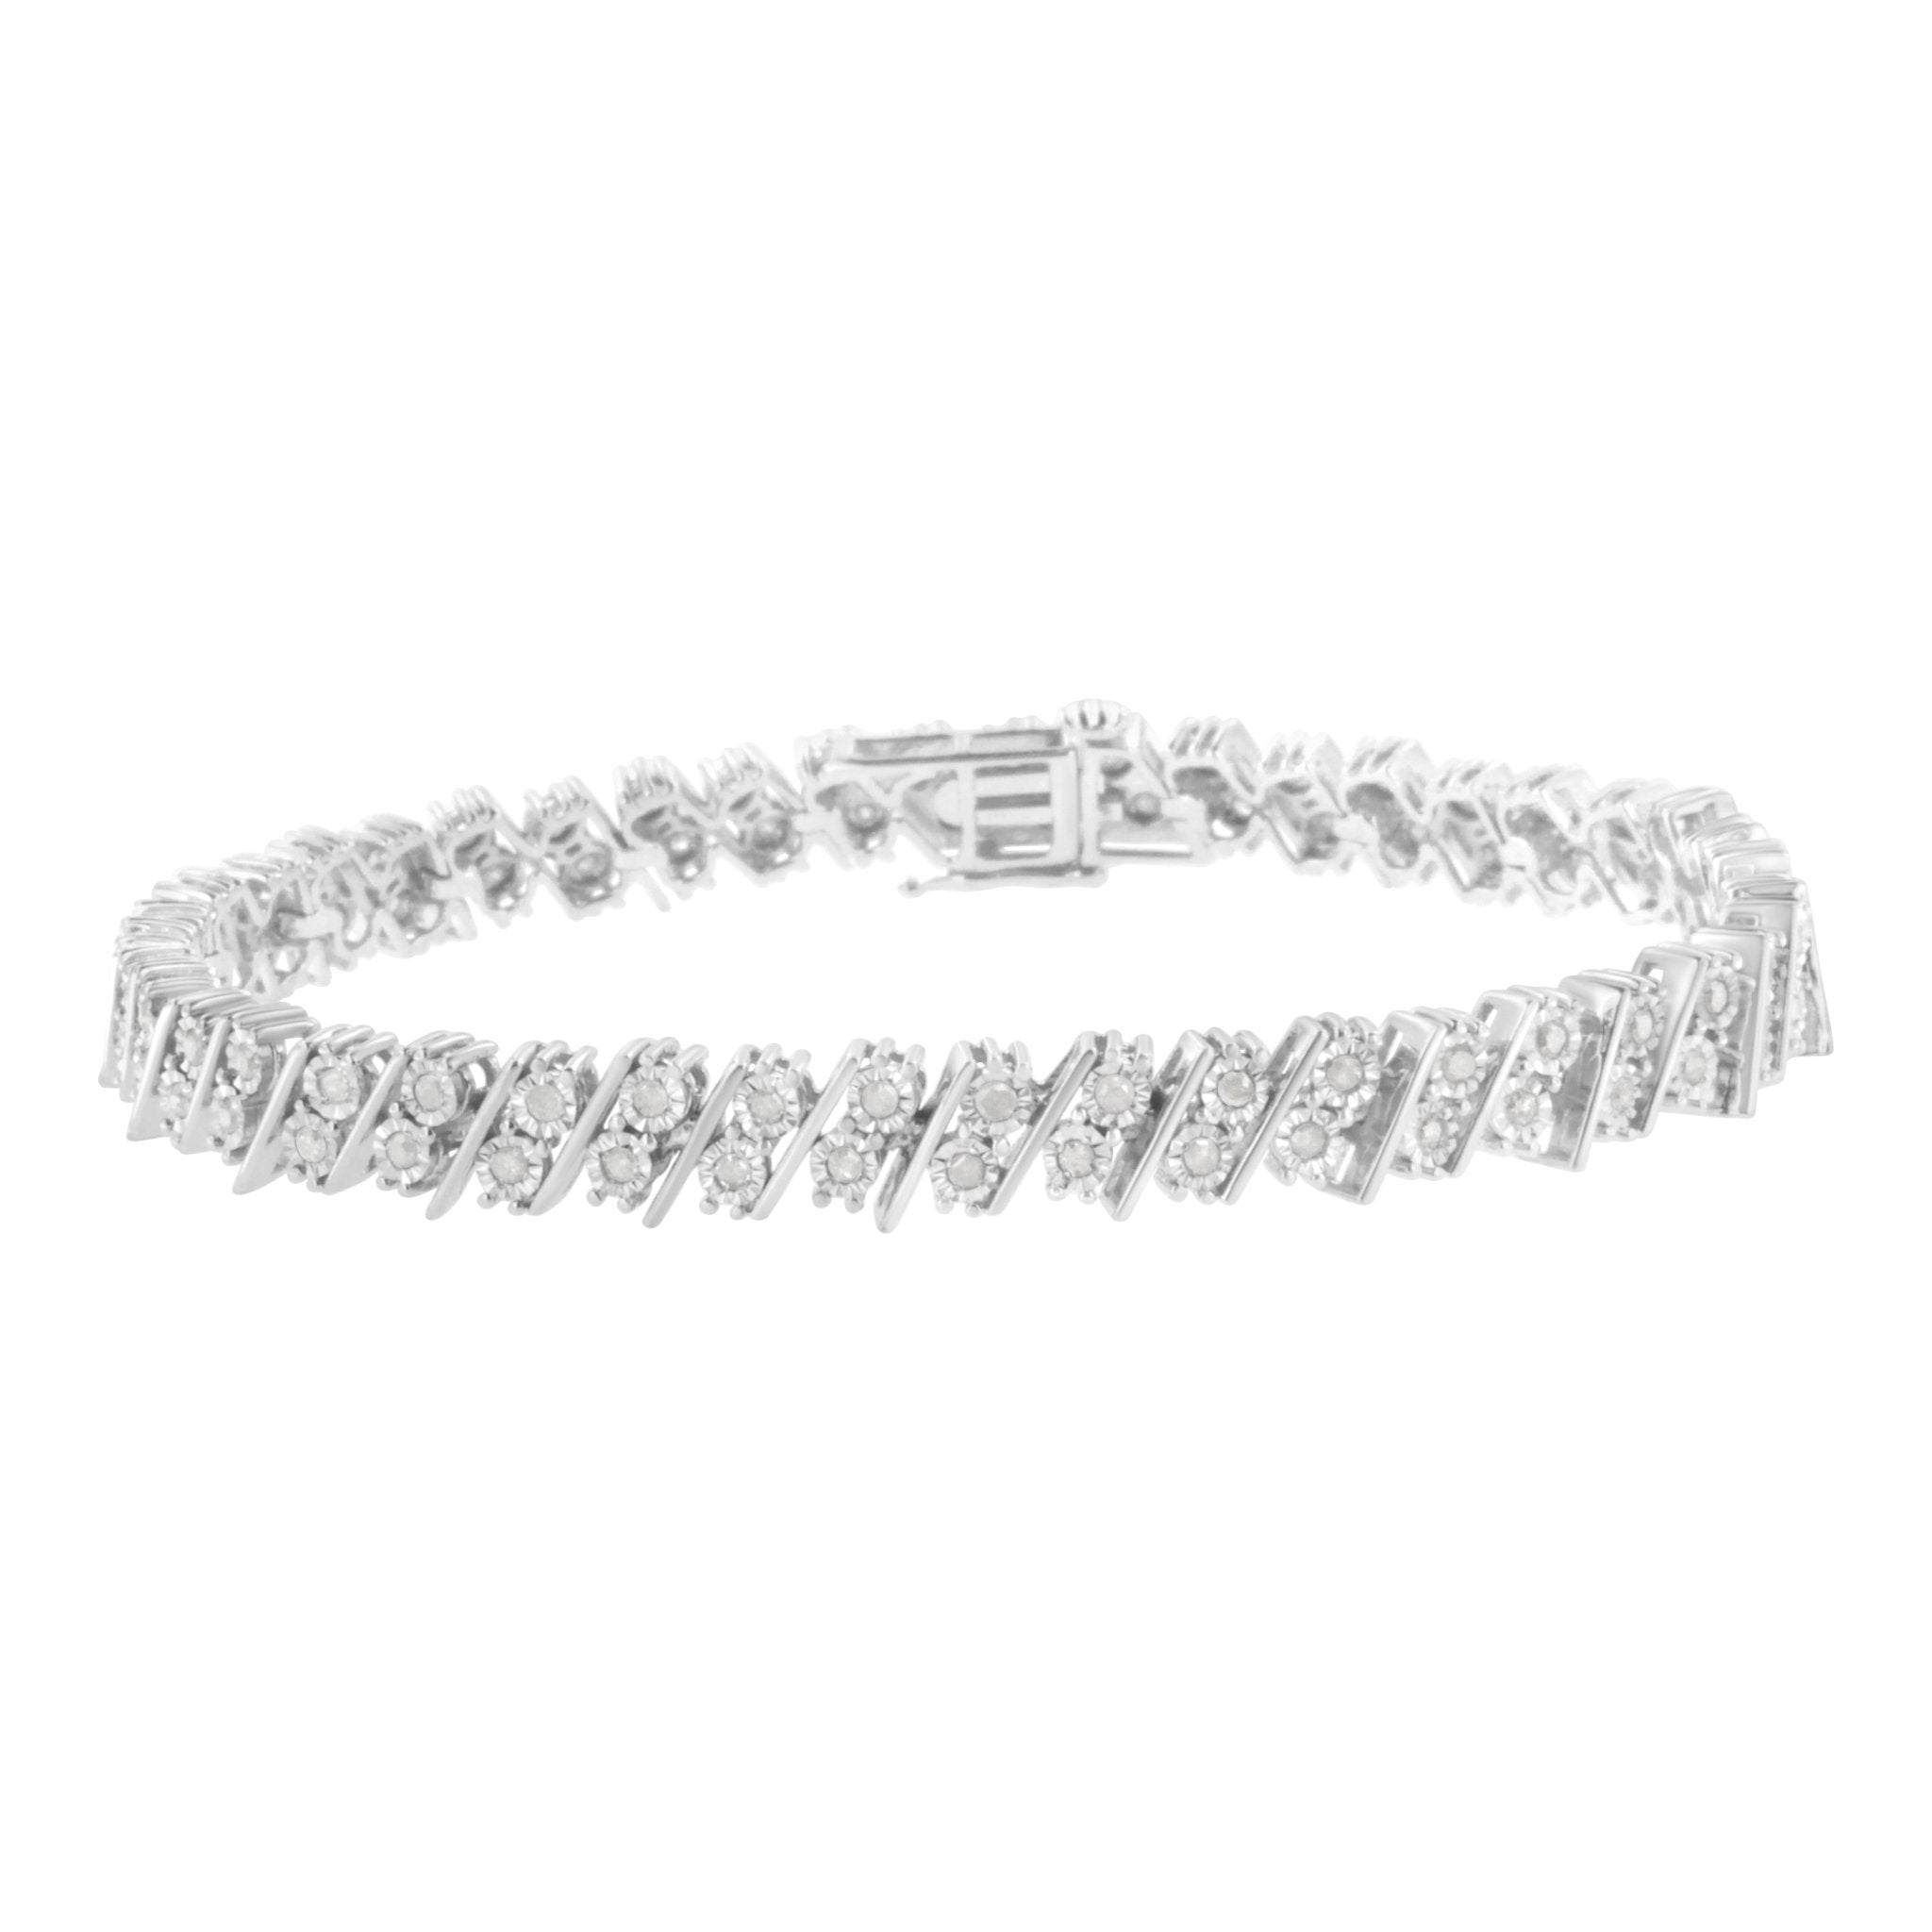 .925 Sterling Silver 1 Cttw Double Row Miracle Set Diamond Link Bracelet (I-J Clarity, I3 Color) - Size 7.25